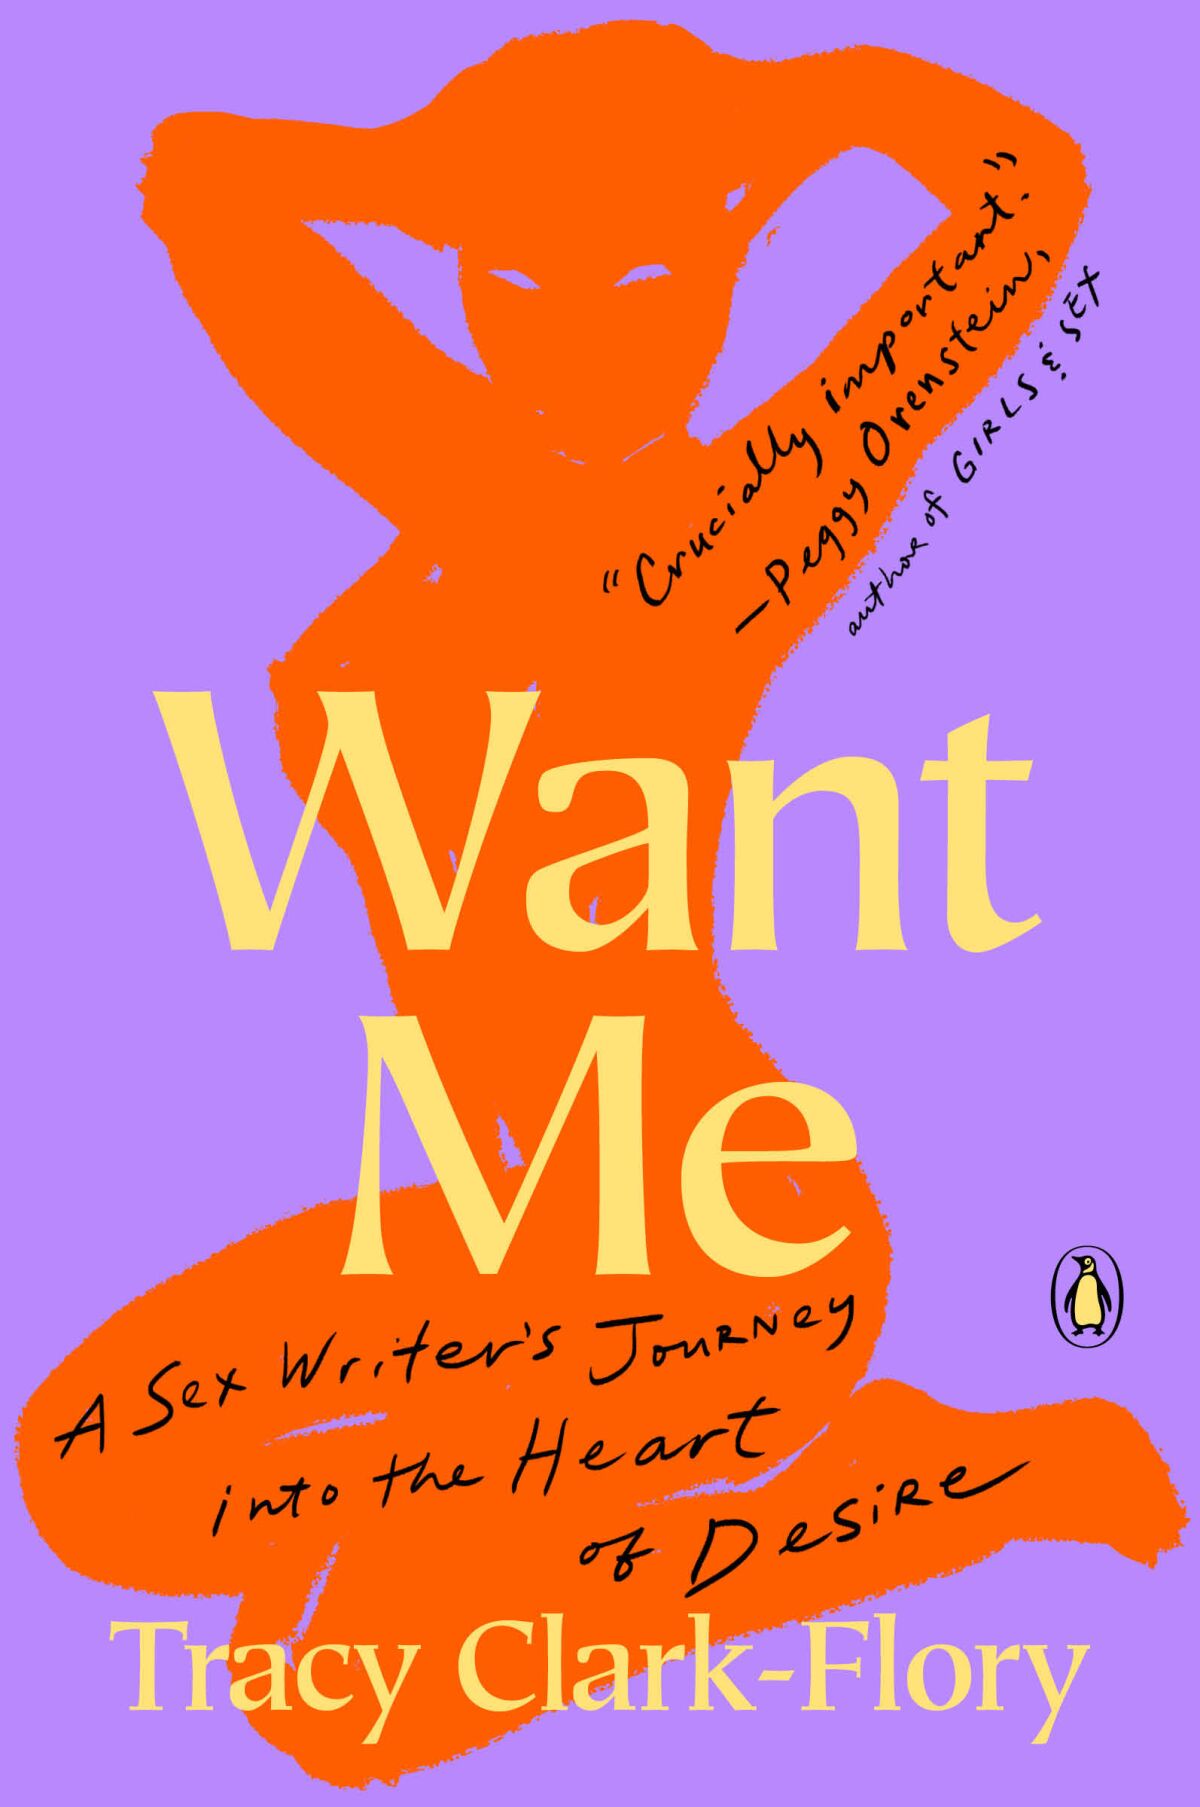 The cover of "Want Me: A Sex Writer's Journey Into the Heart of Desire," by Tracy Clark-Flory